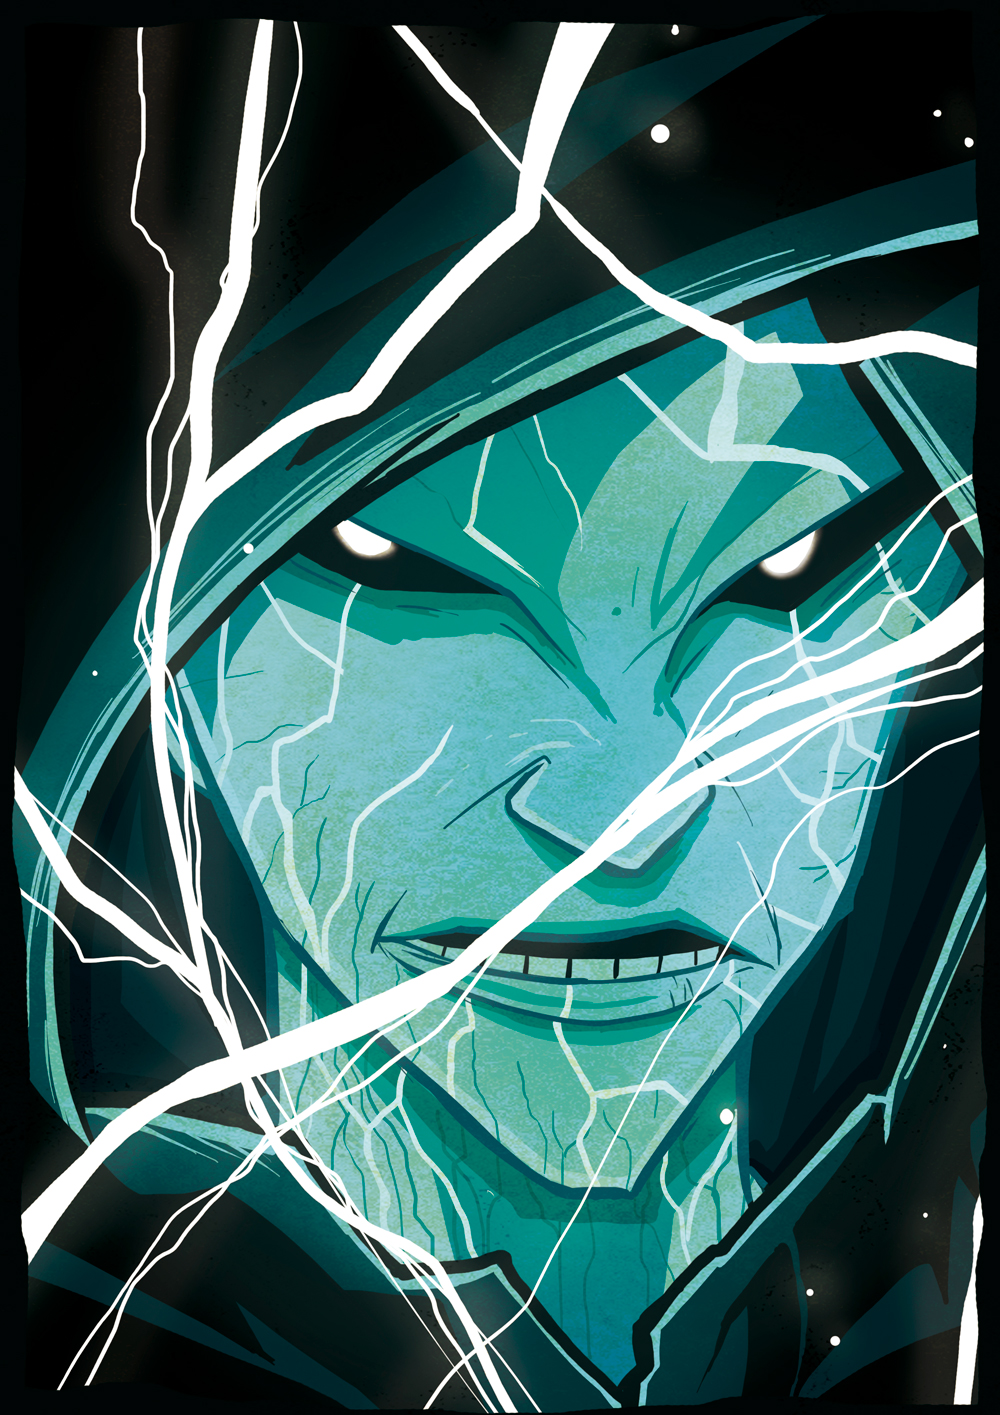 Electro from Amazing Spiderman 2 by Dahcoomicman on DeviantArt